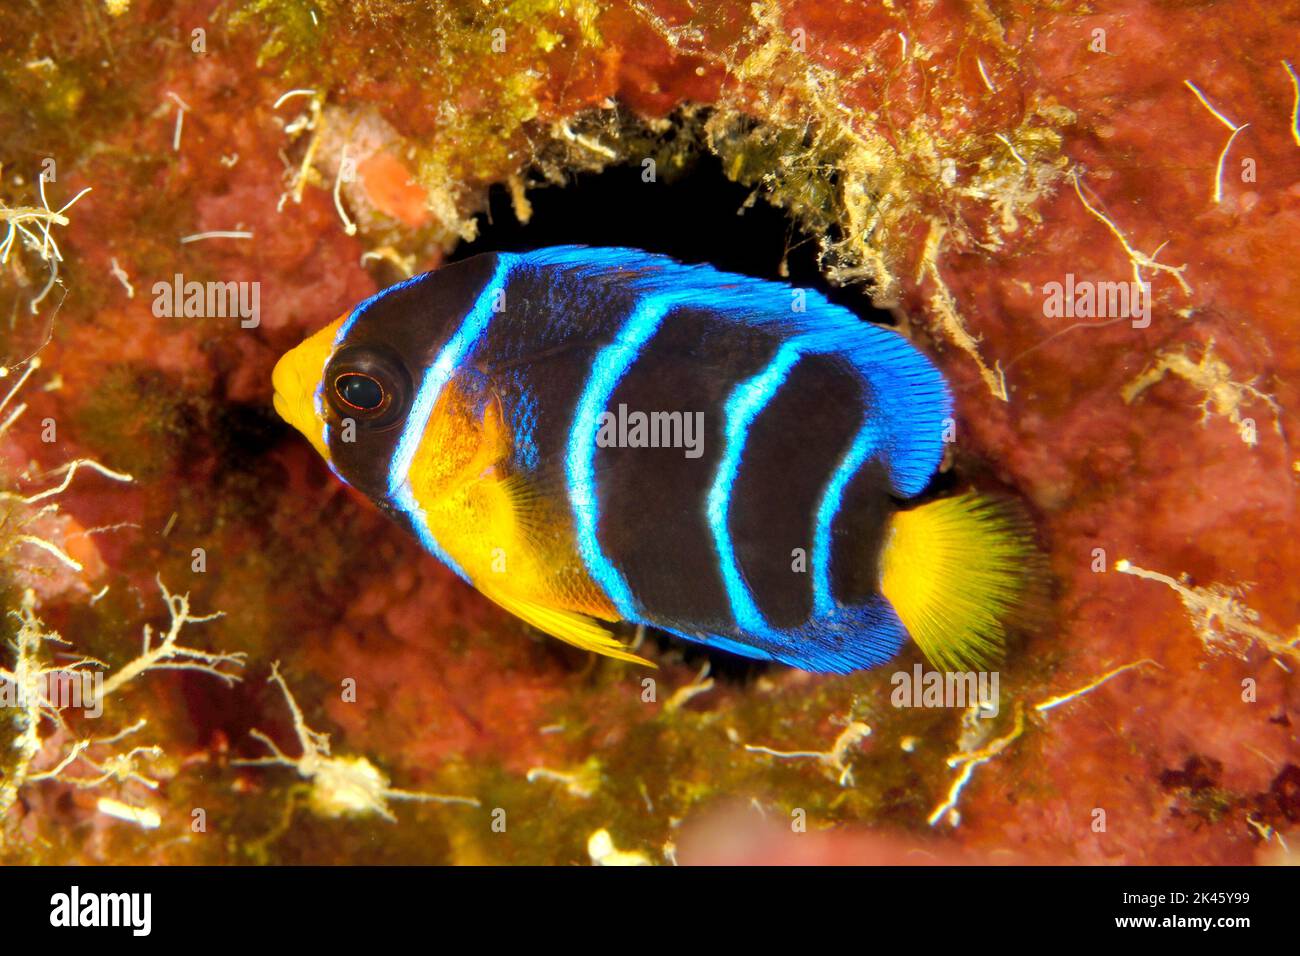 A juvenile queen angelfish in Roatan Honduras hides within the crevices of a reef. They are very shy and hard to photograph without a lot of patience. Stock Photo